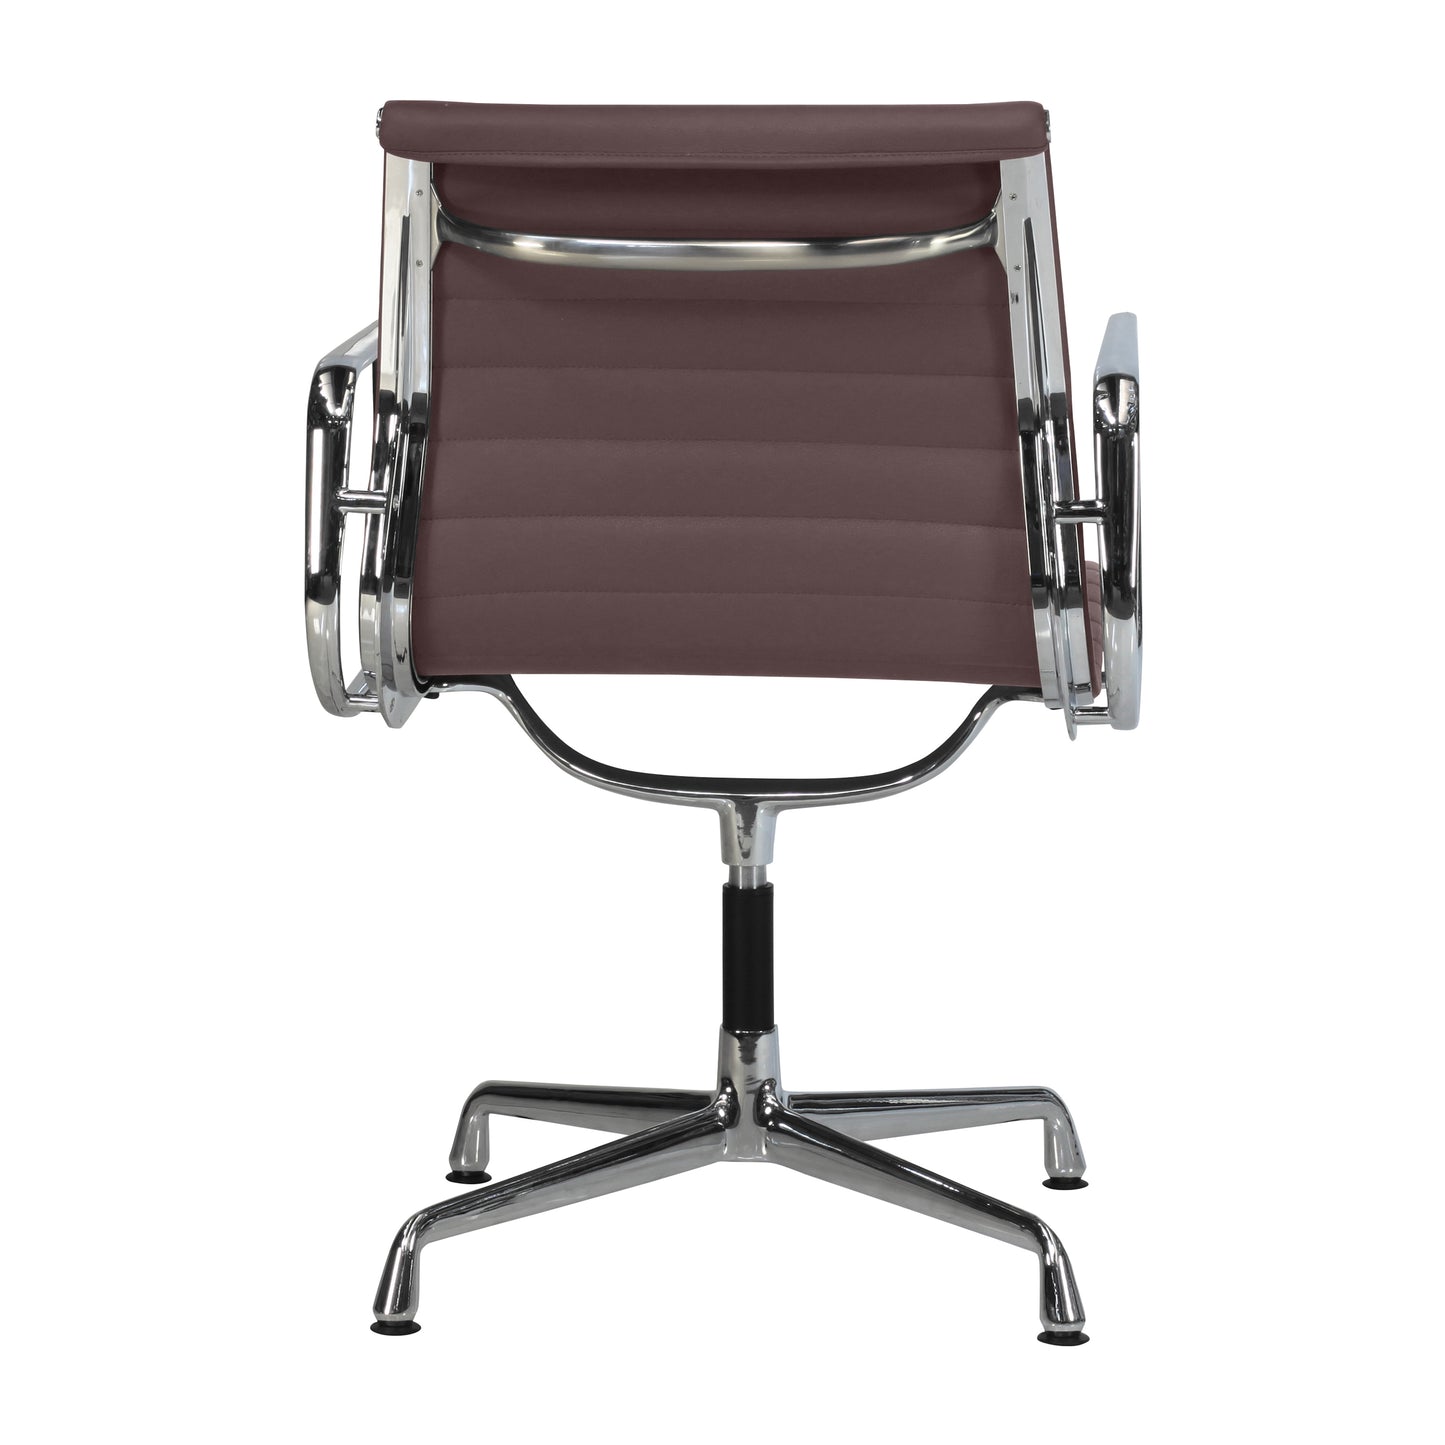 Chair without wheels aluminium style | Chocolate Leather | Back